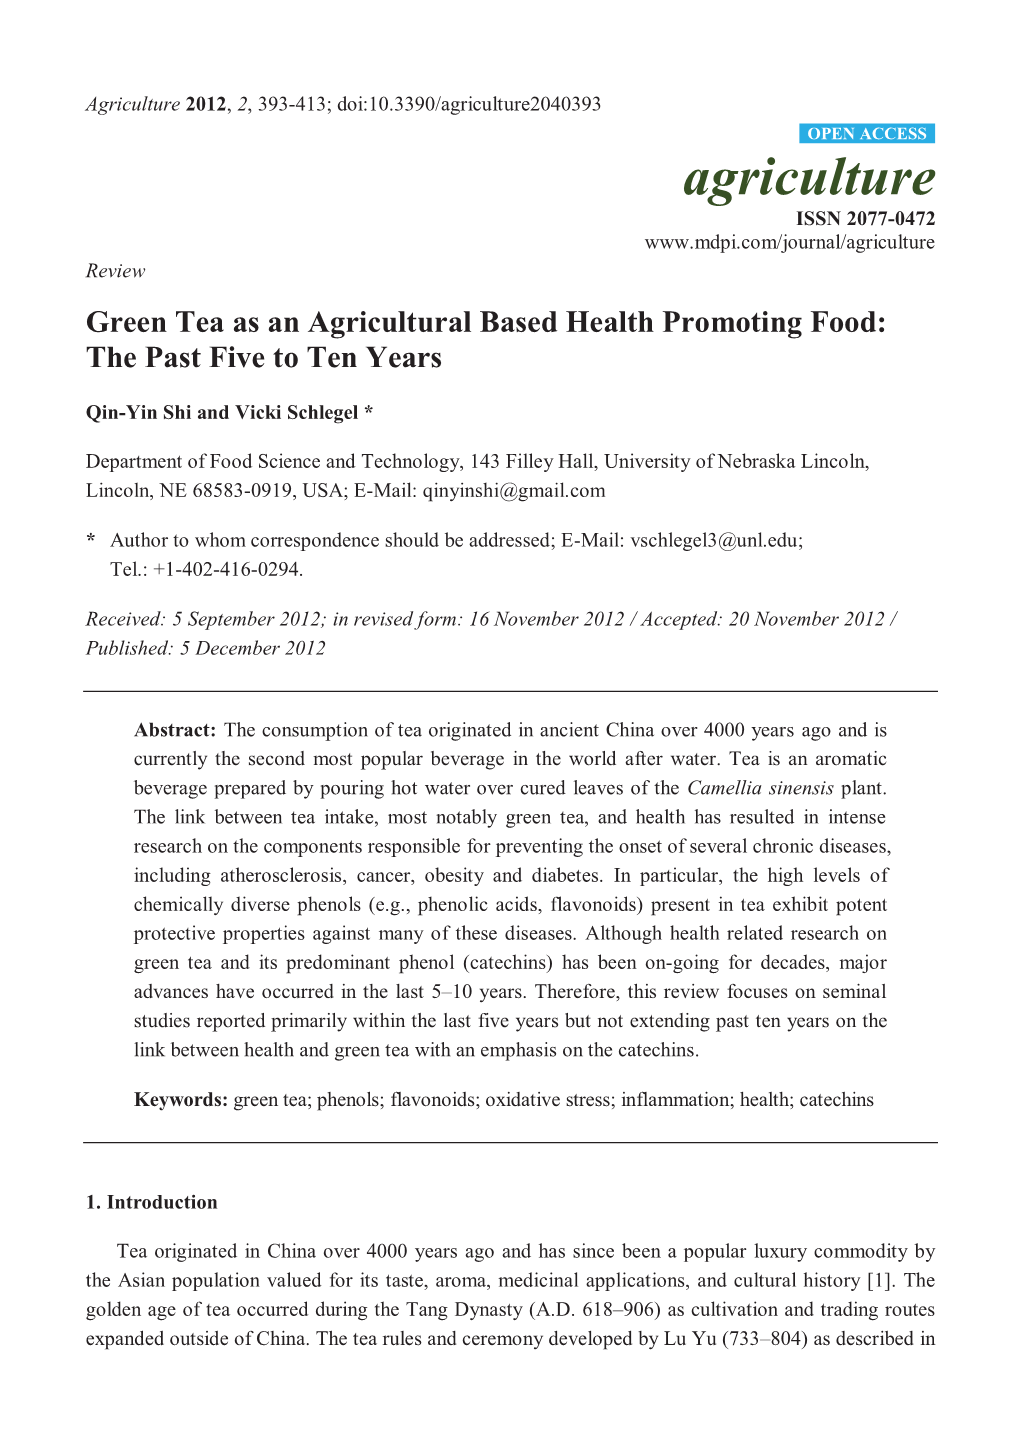 Green Tea As an Agricultural Based Health Promoting Food: the Past Five to Ten Years